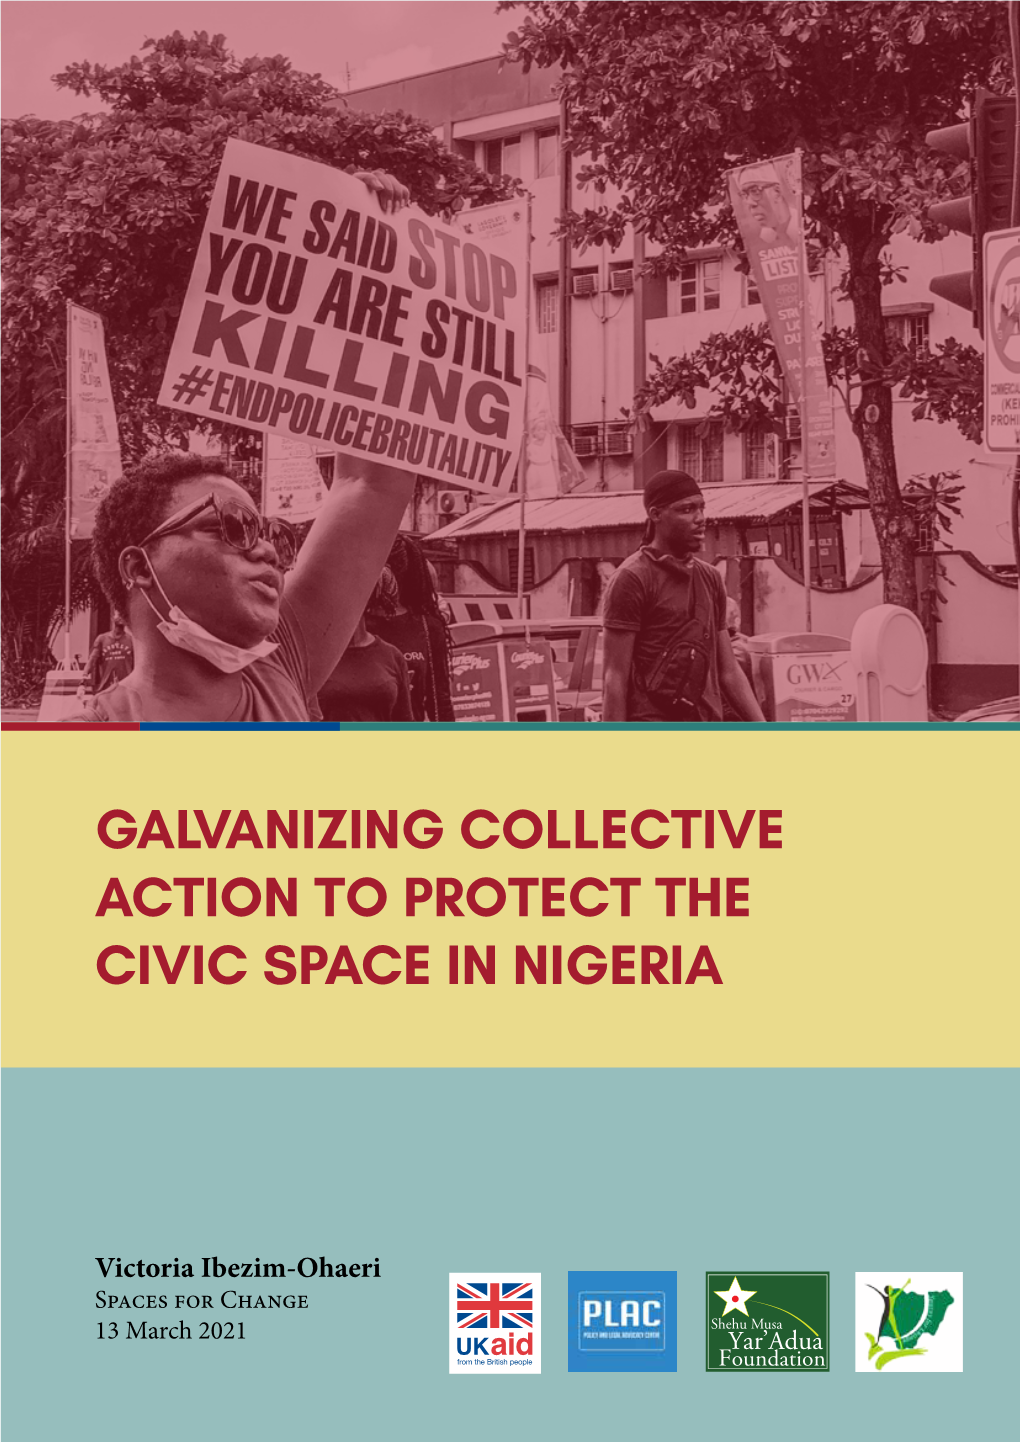 Galvanizing Collective Action to Protect the Civic Space in Nigeria